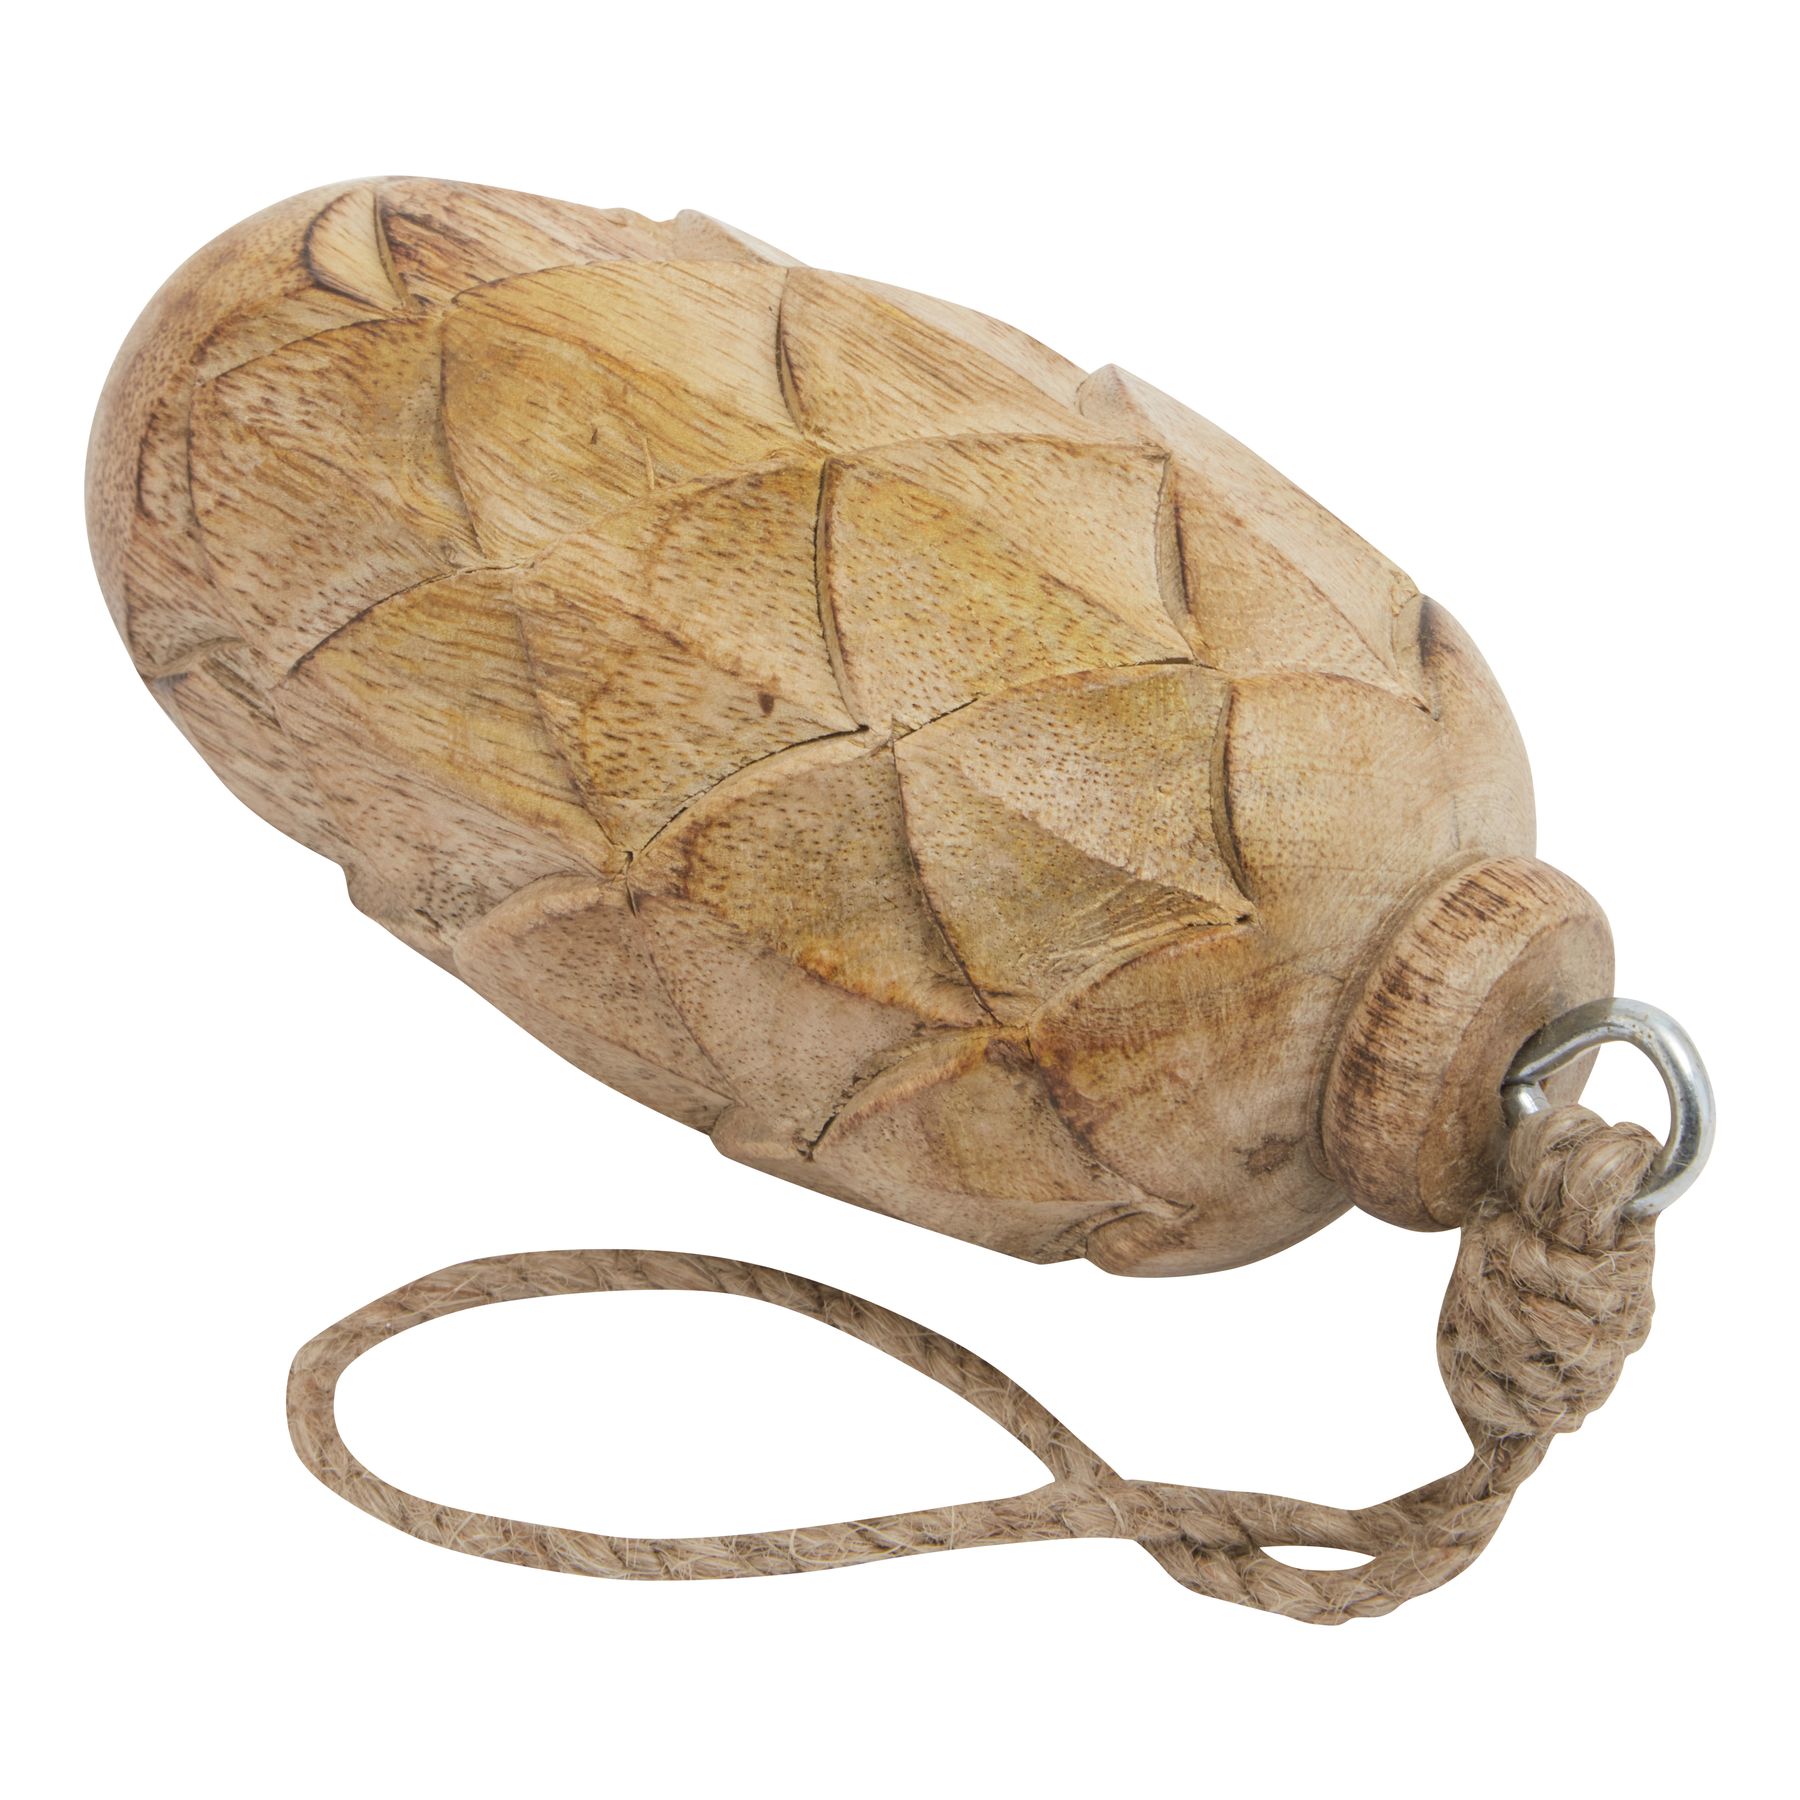 Natural Wooden Pine Cone Bauble - Image 2